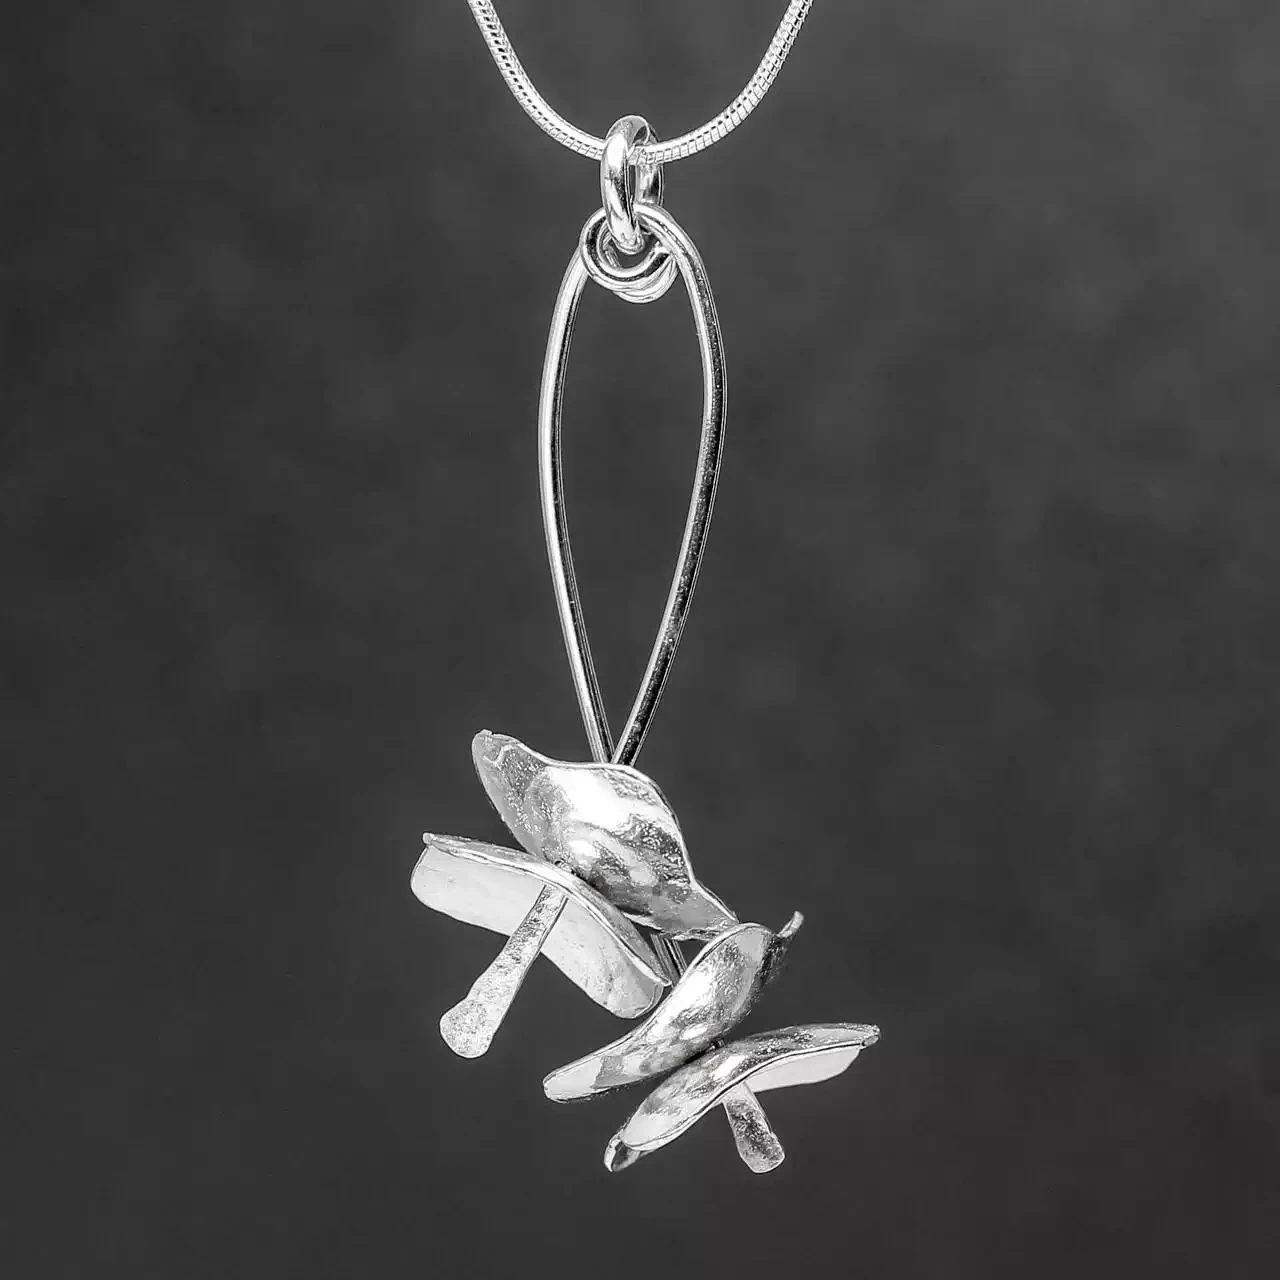 Tinkerbell Silver Pendant by Silverfish